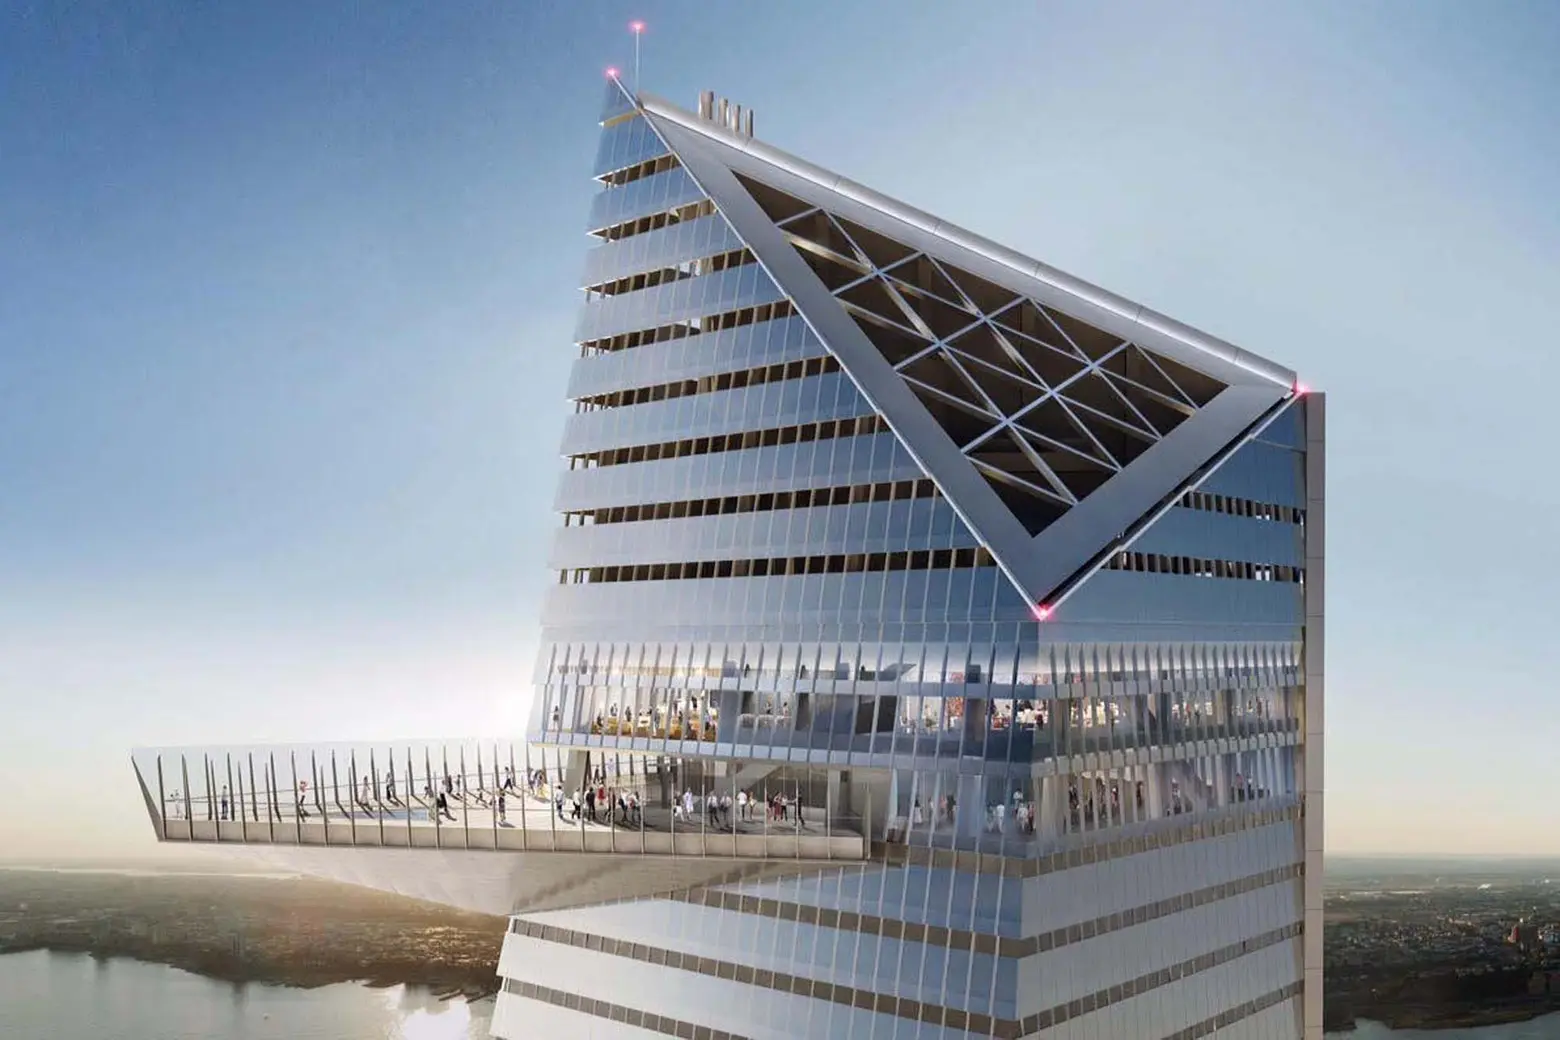 New details revealed about Hudson Yards observation deck and public spaces